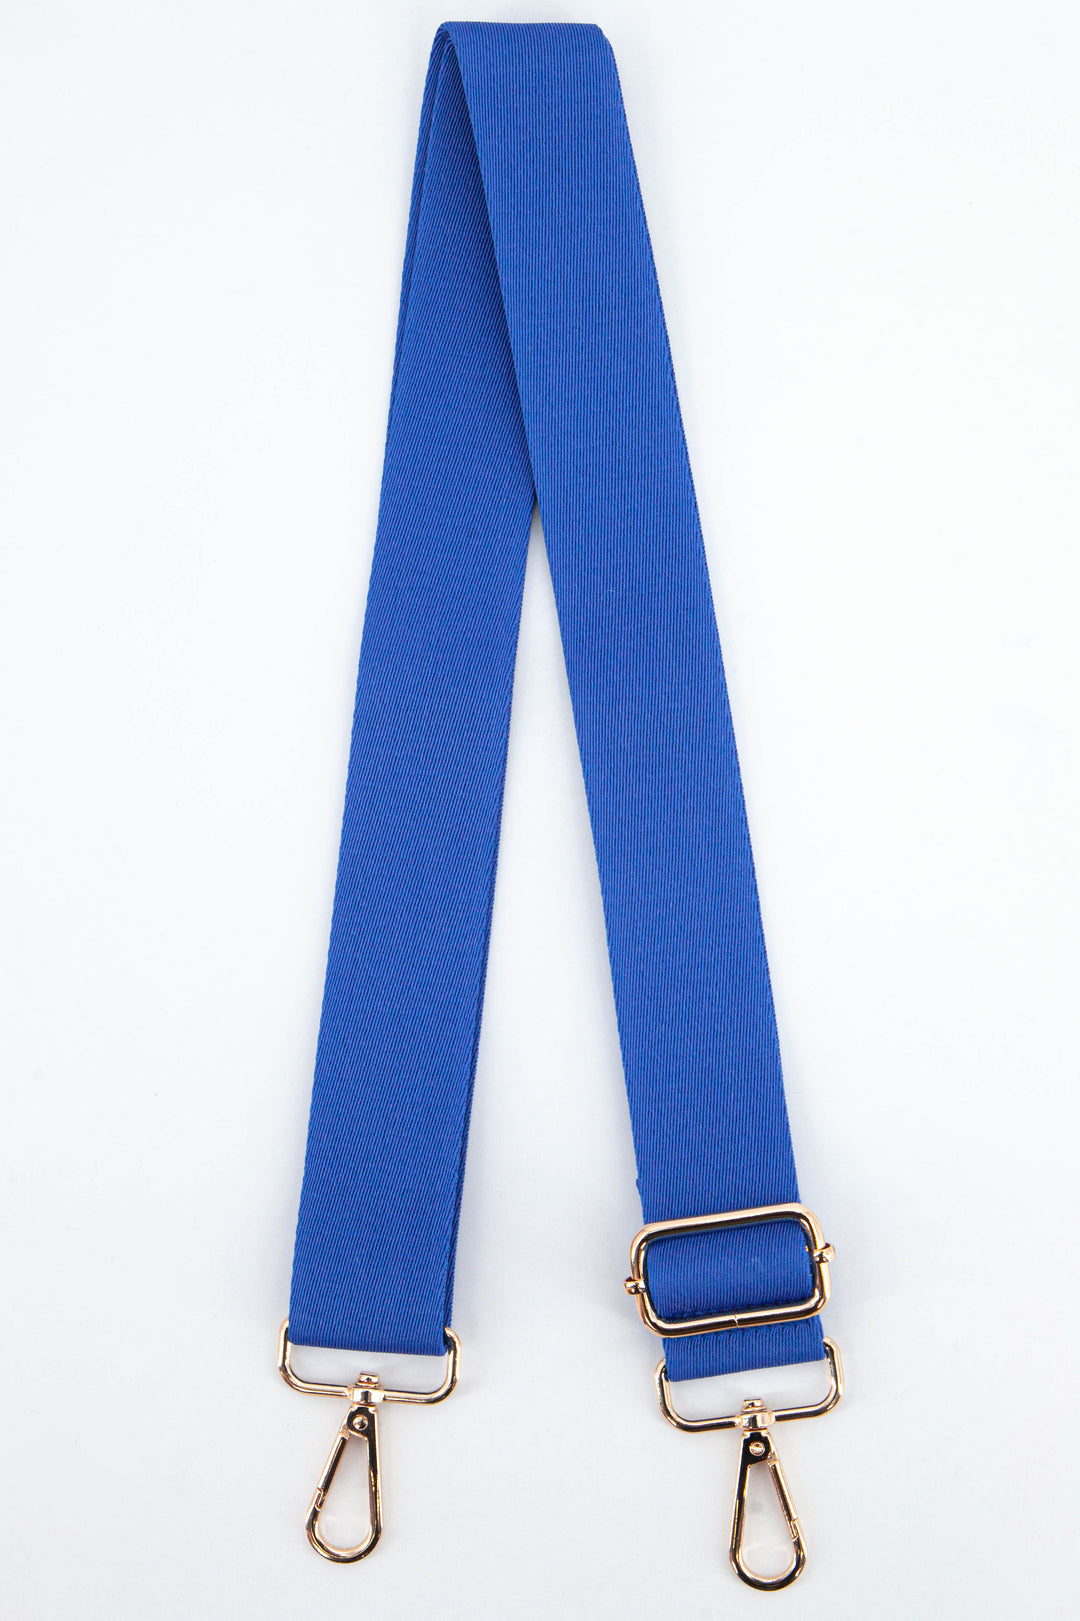 plain blue clip on bag strap in a textured orange woven material with gold hardware